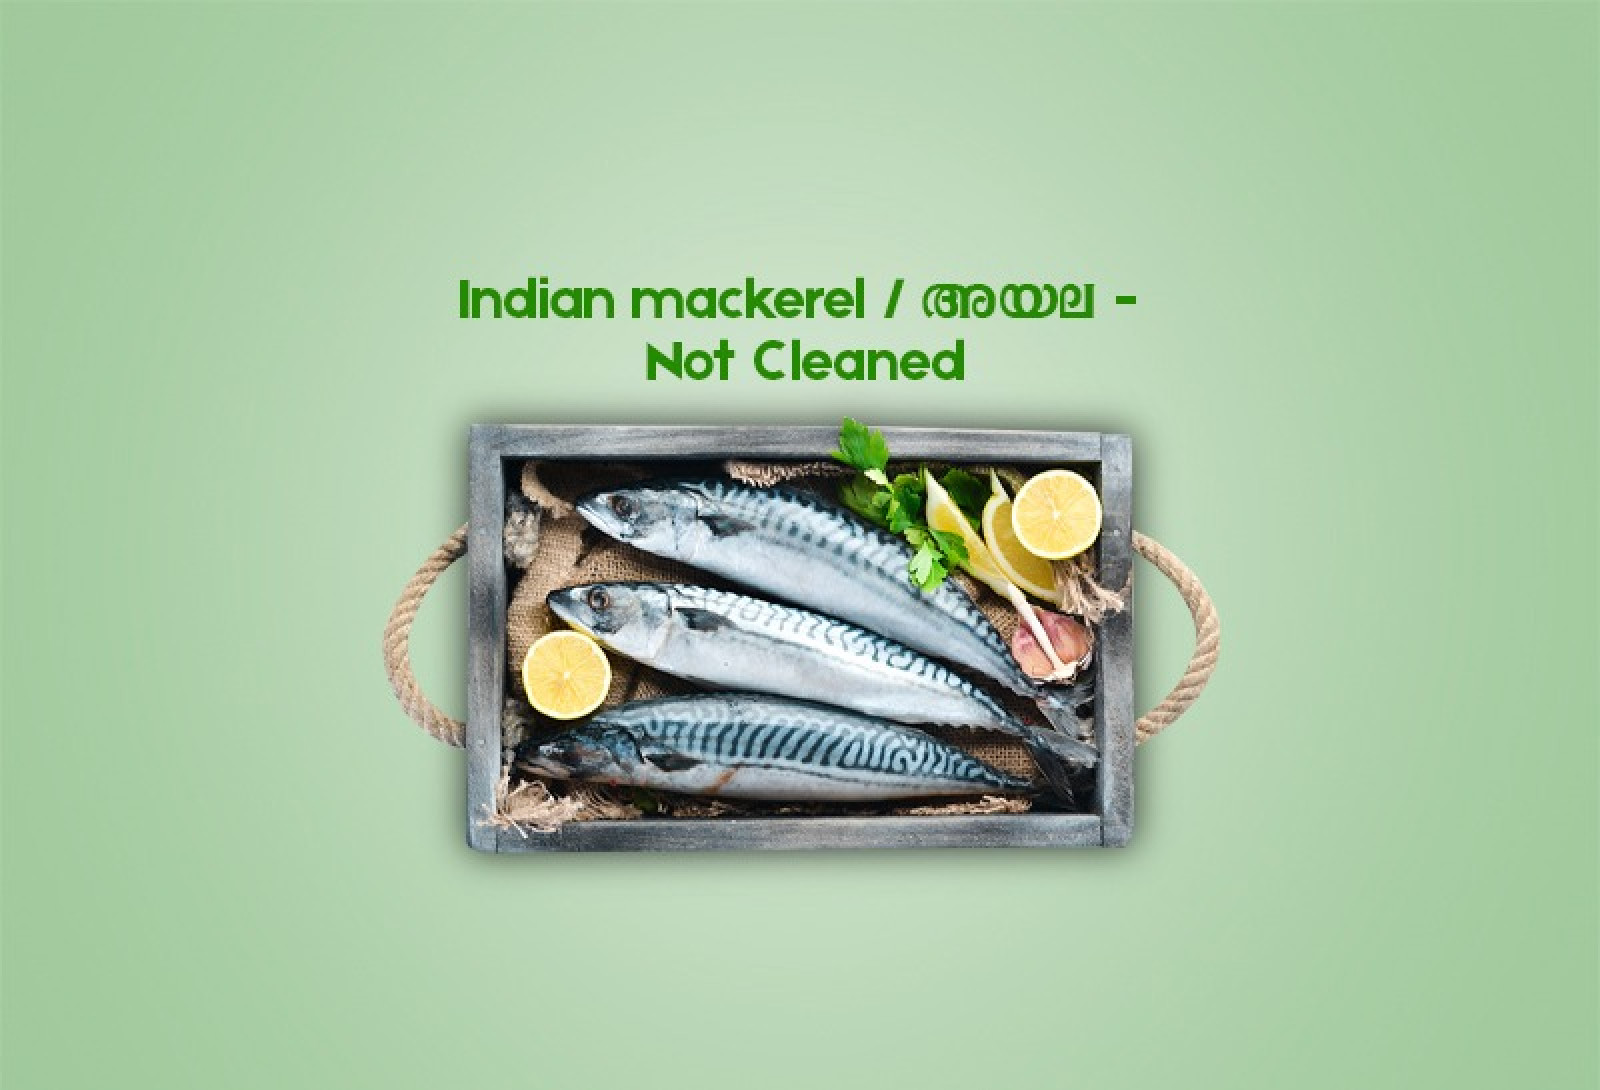 Indian mackerel / അയല (500gm) - Not Cleaned 